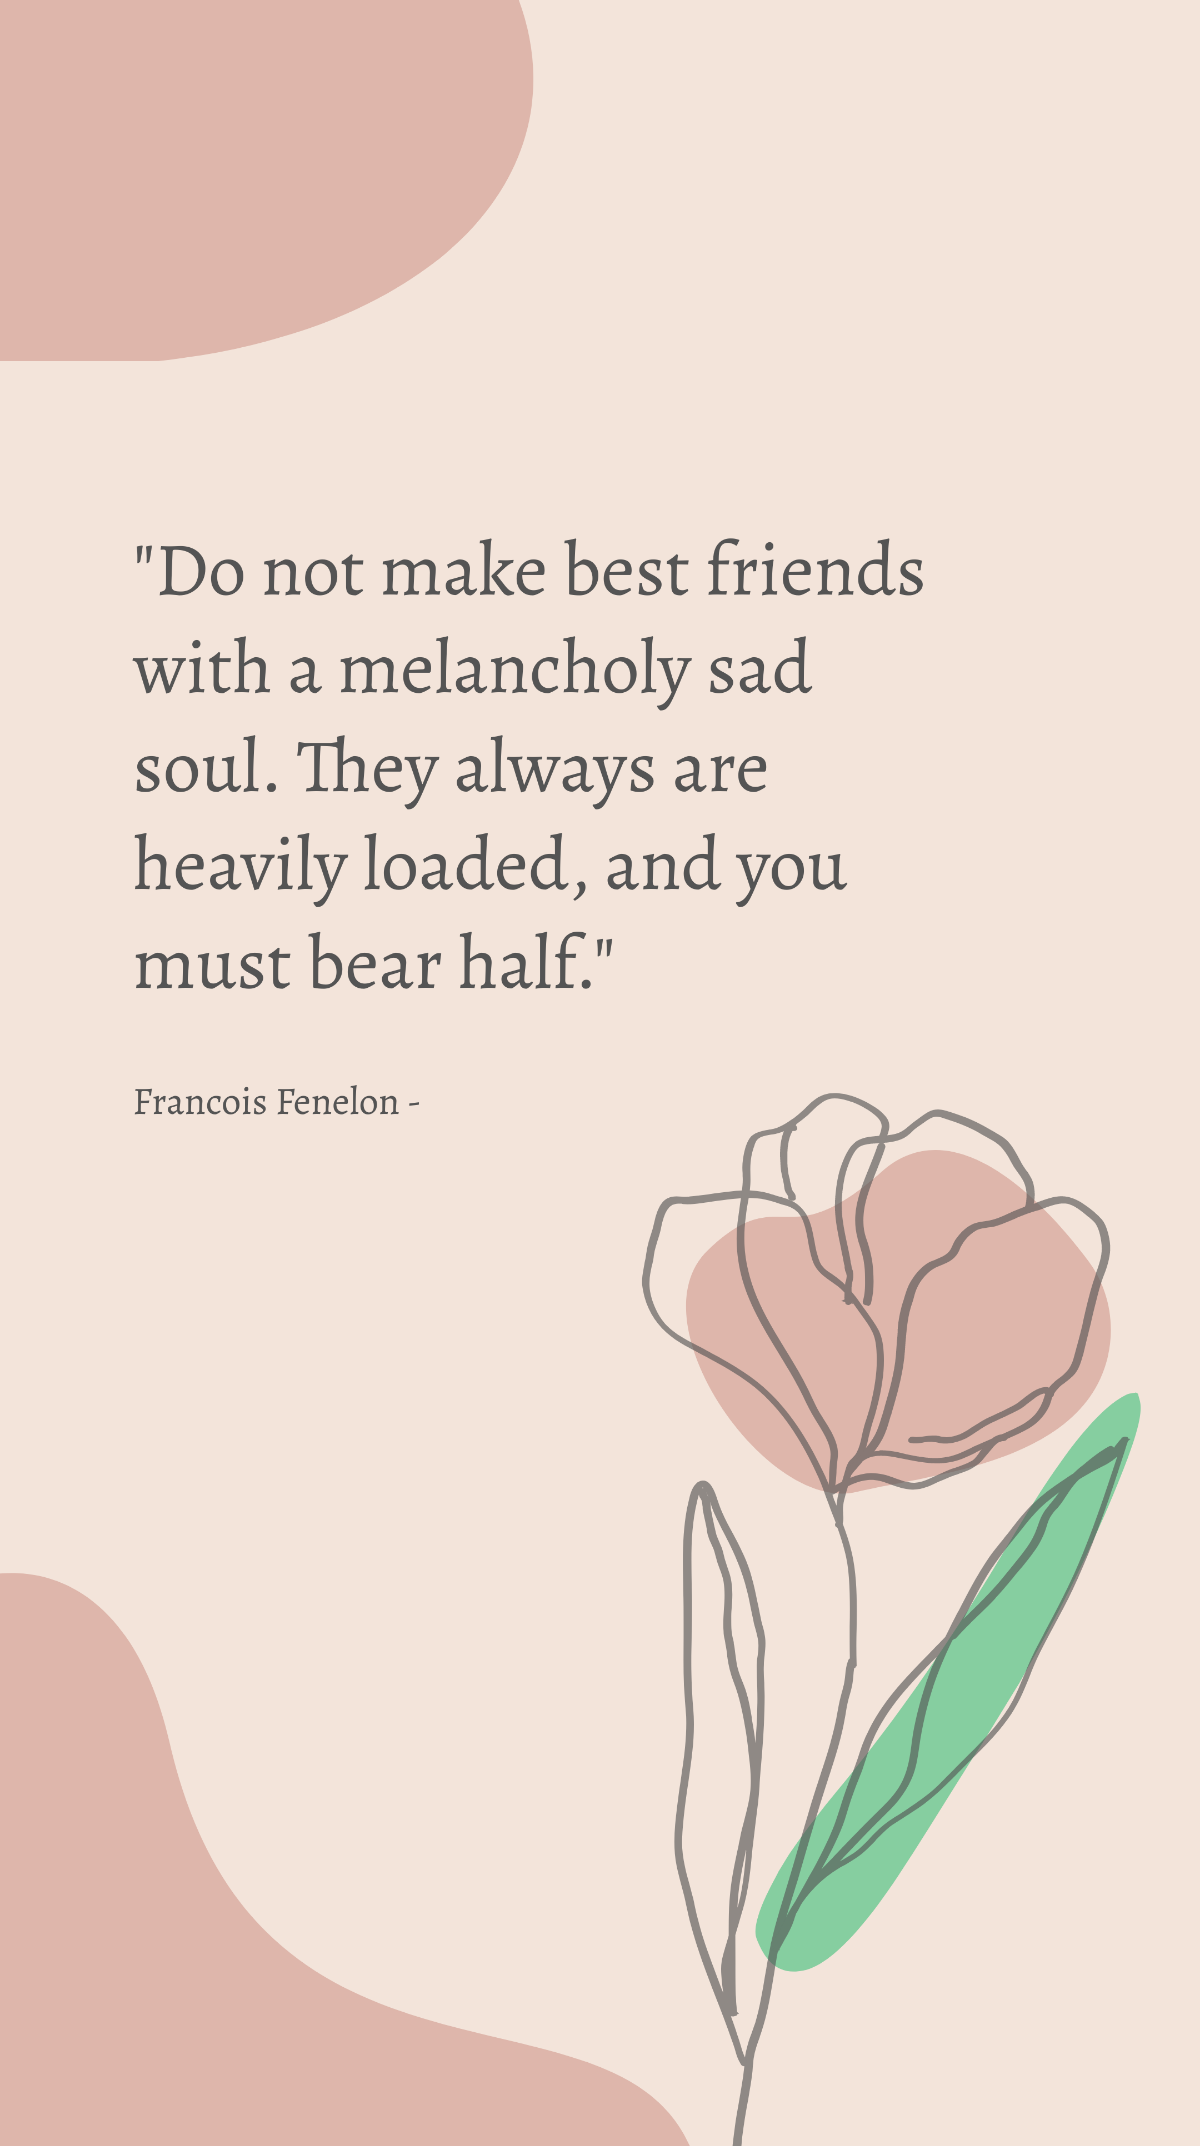 Francois Fenelon - Do not make best friends with a melancholy sad soul. They always are heavily loaded, and you must bear half. Template